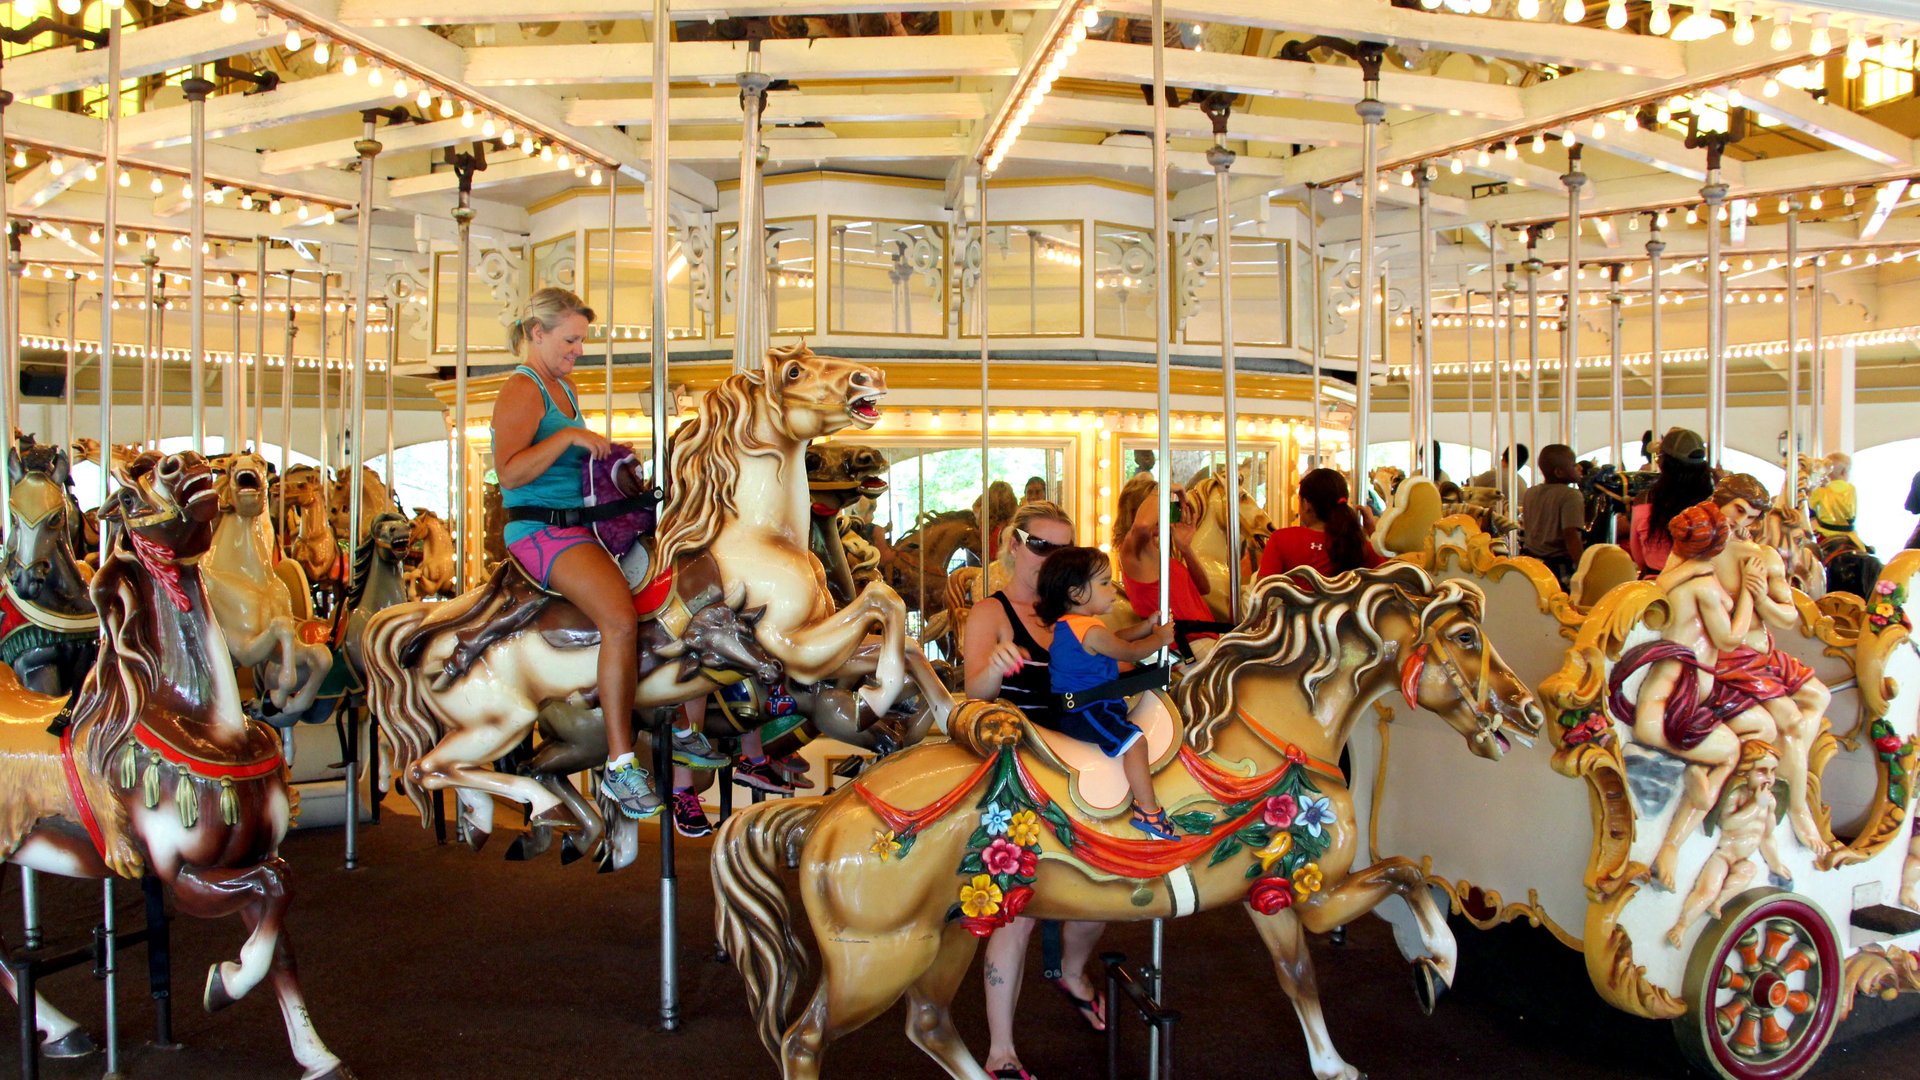 Riverview Carousel | Six Flags Over Georgia